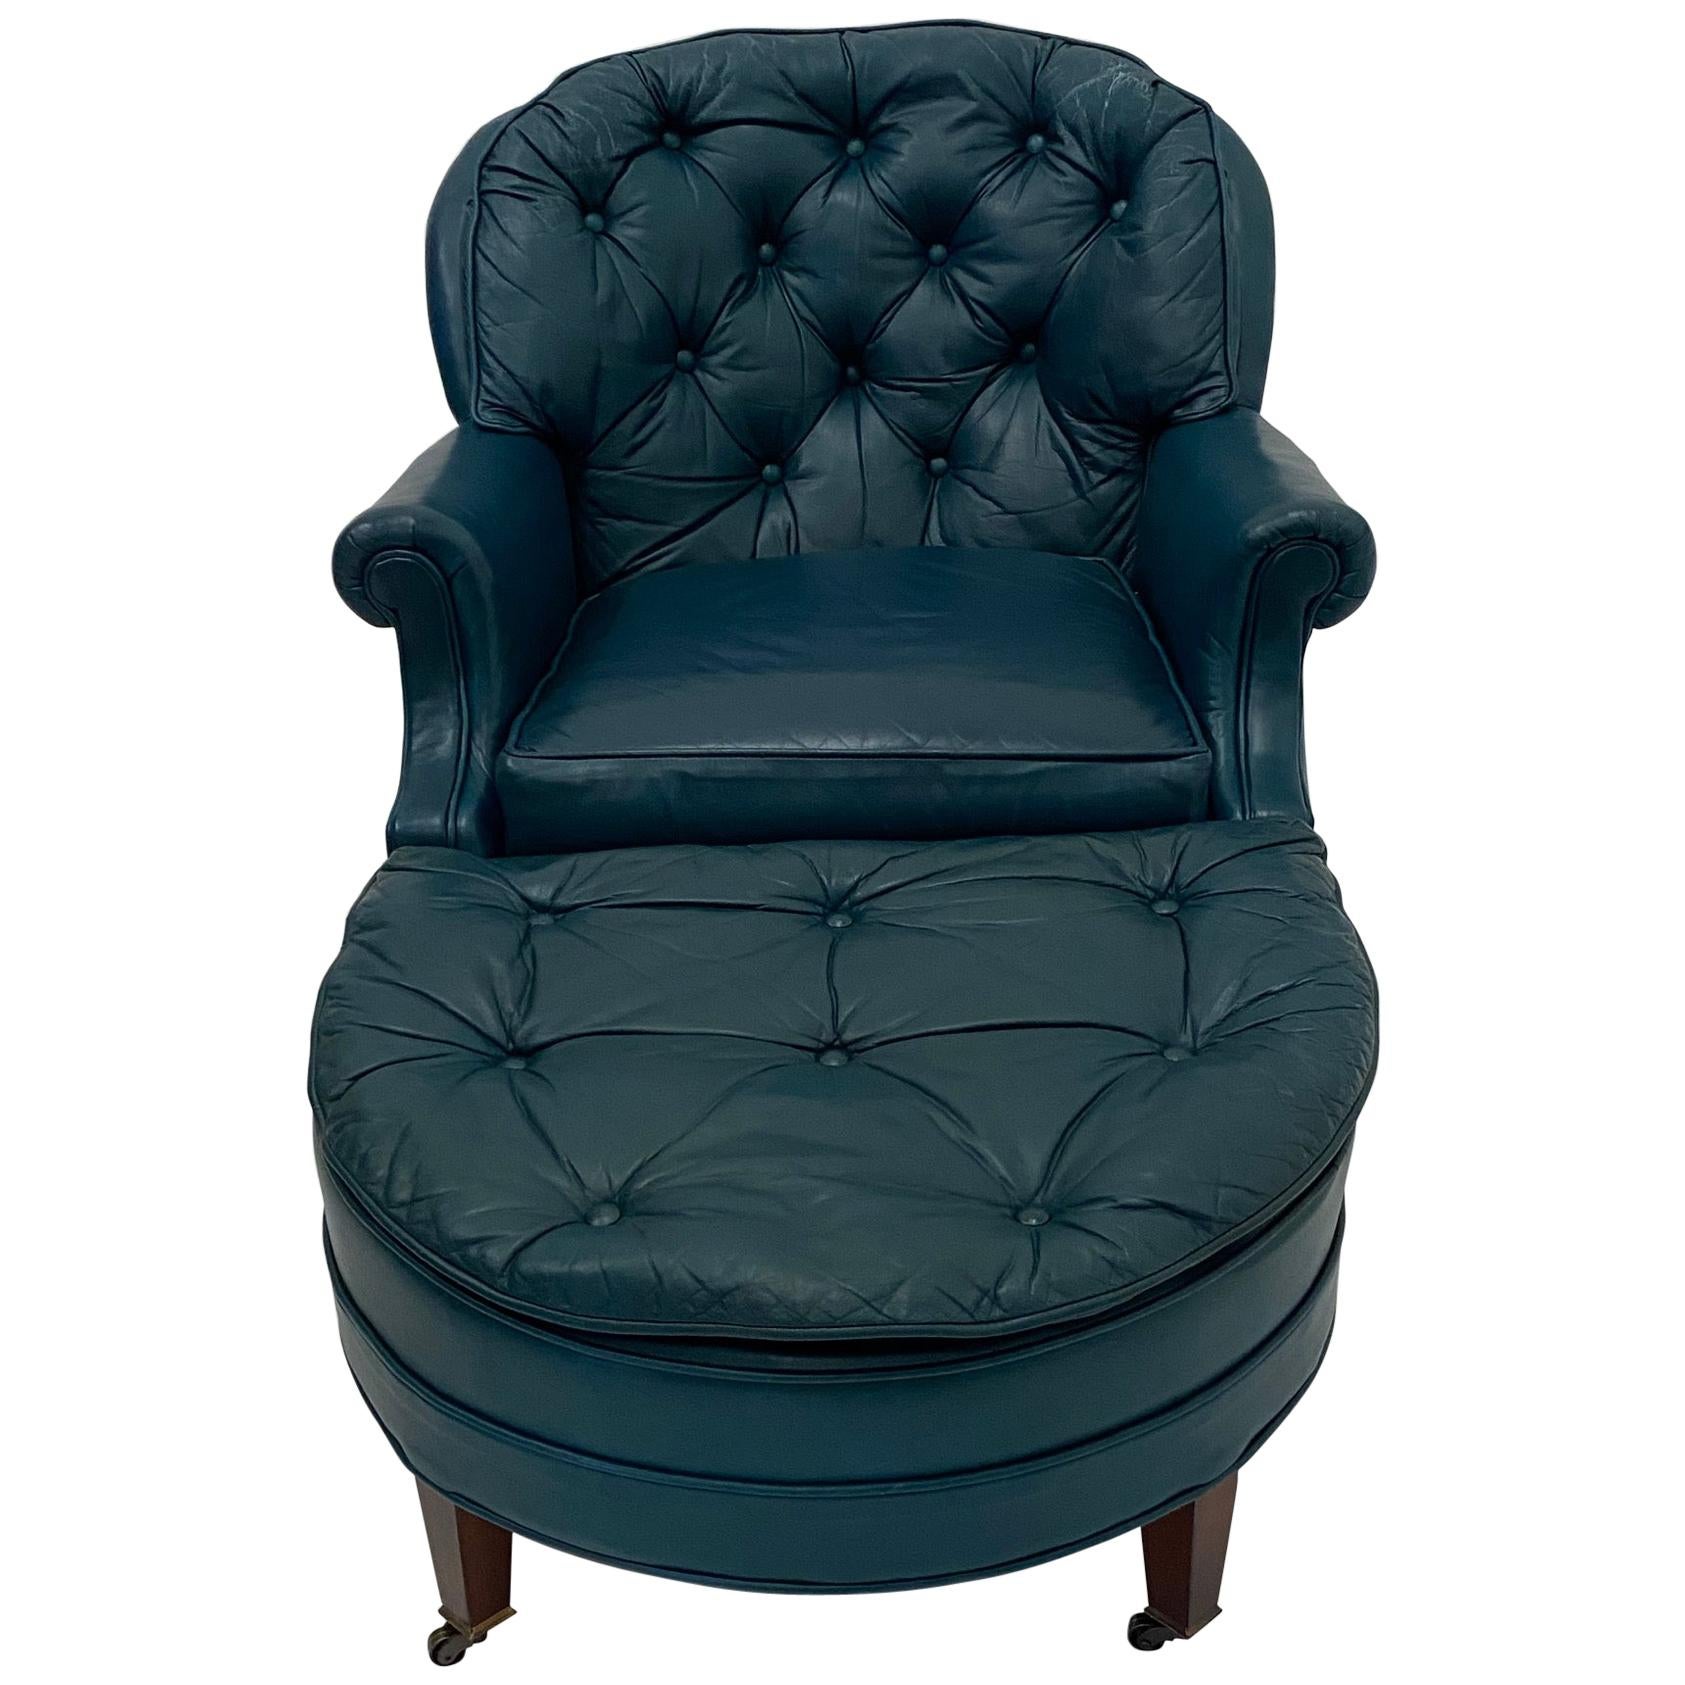 Luxurious Teal Blue Tufted Leather Club Chair and Ottoman